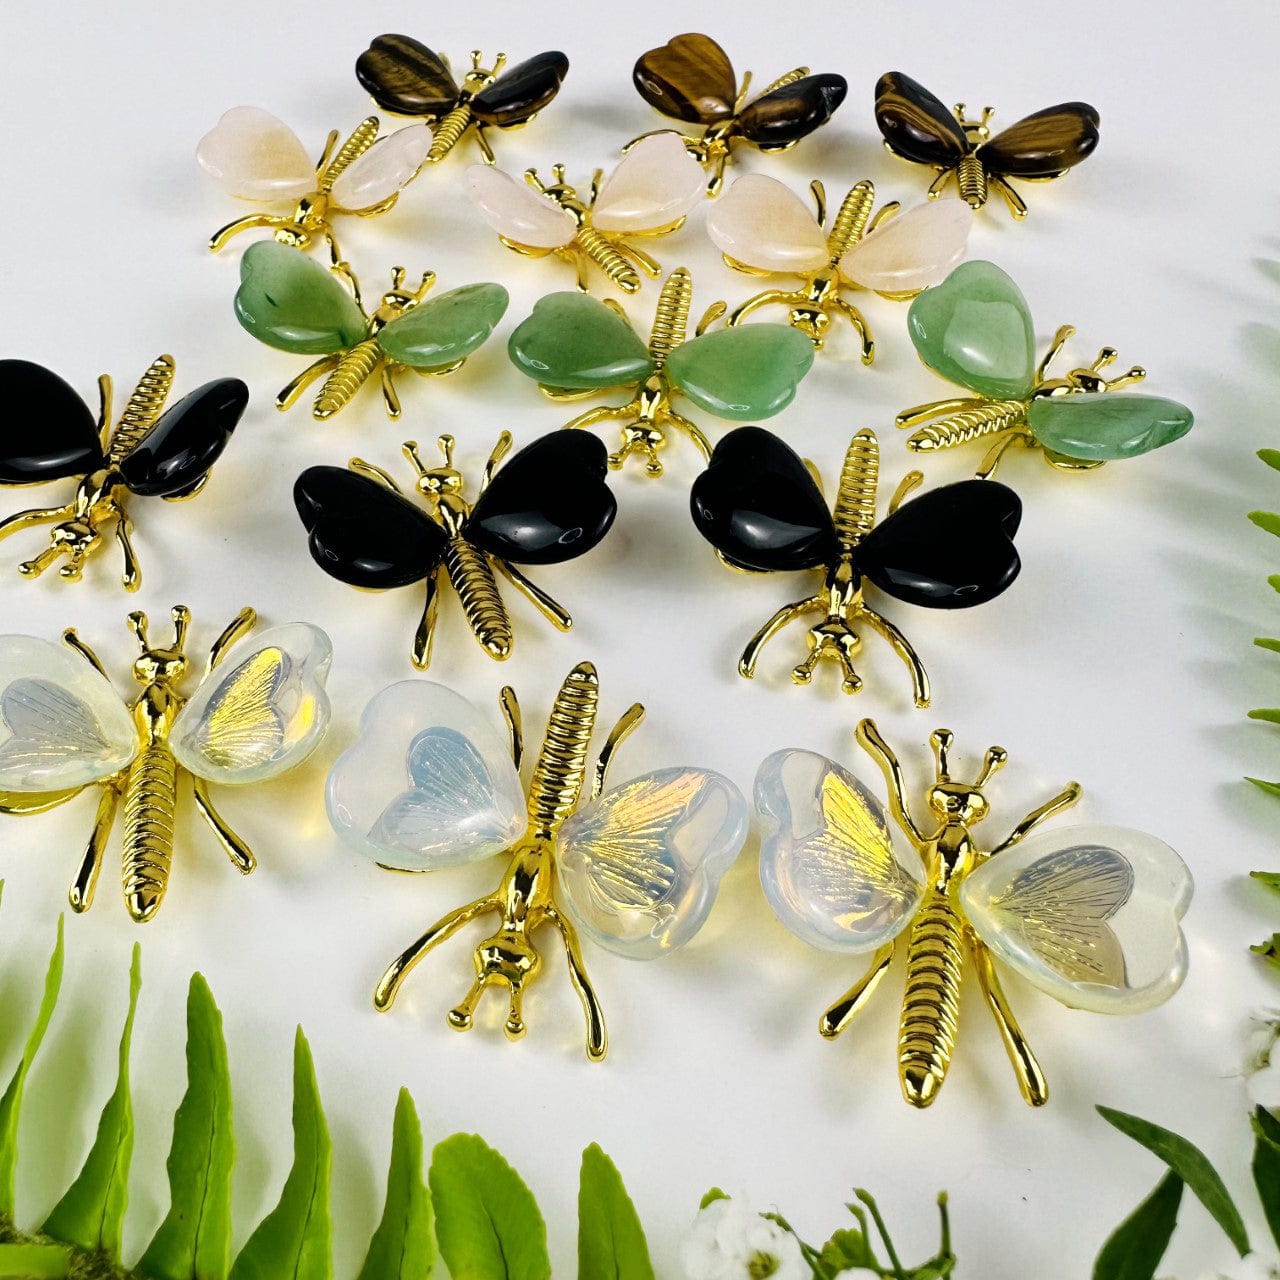 Gemstone Butterflies with Gold Tone Body on a table showing the assorted stones we carry from back and fronts